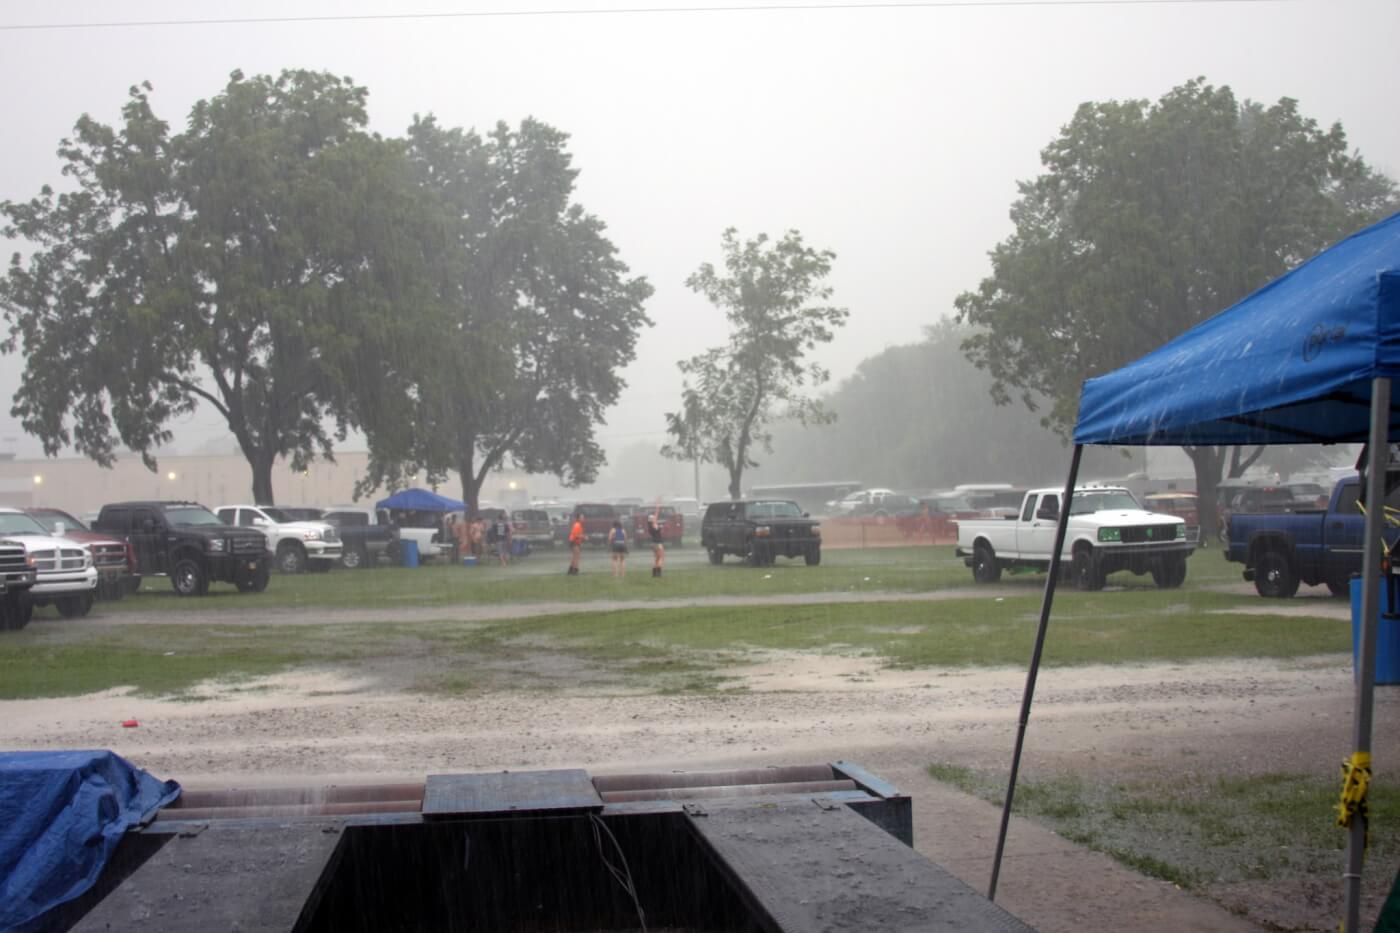 Saturday's record-setting thunderstorm put a damper on the dyno action for the day but didn't stop the crowd from having fun.